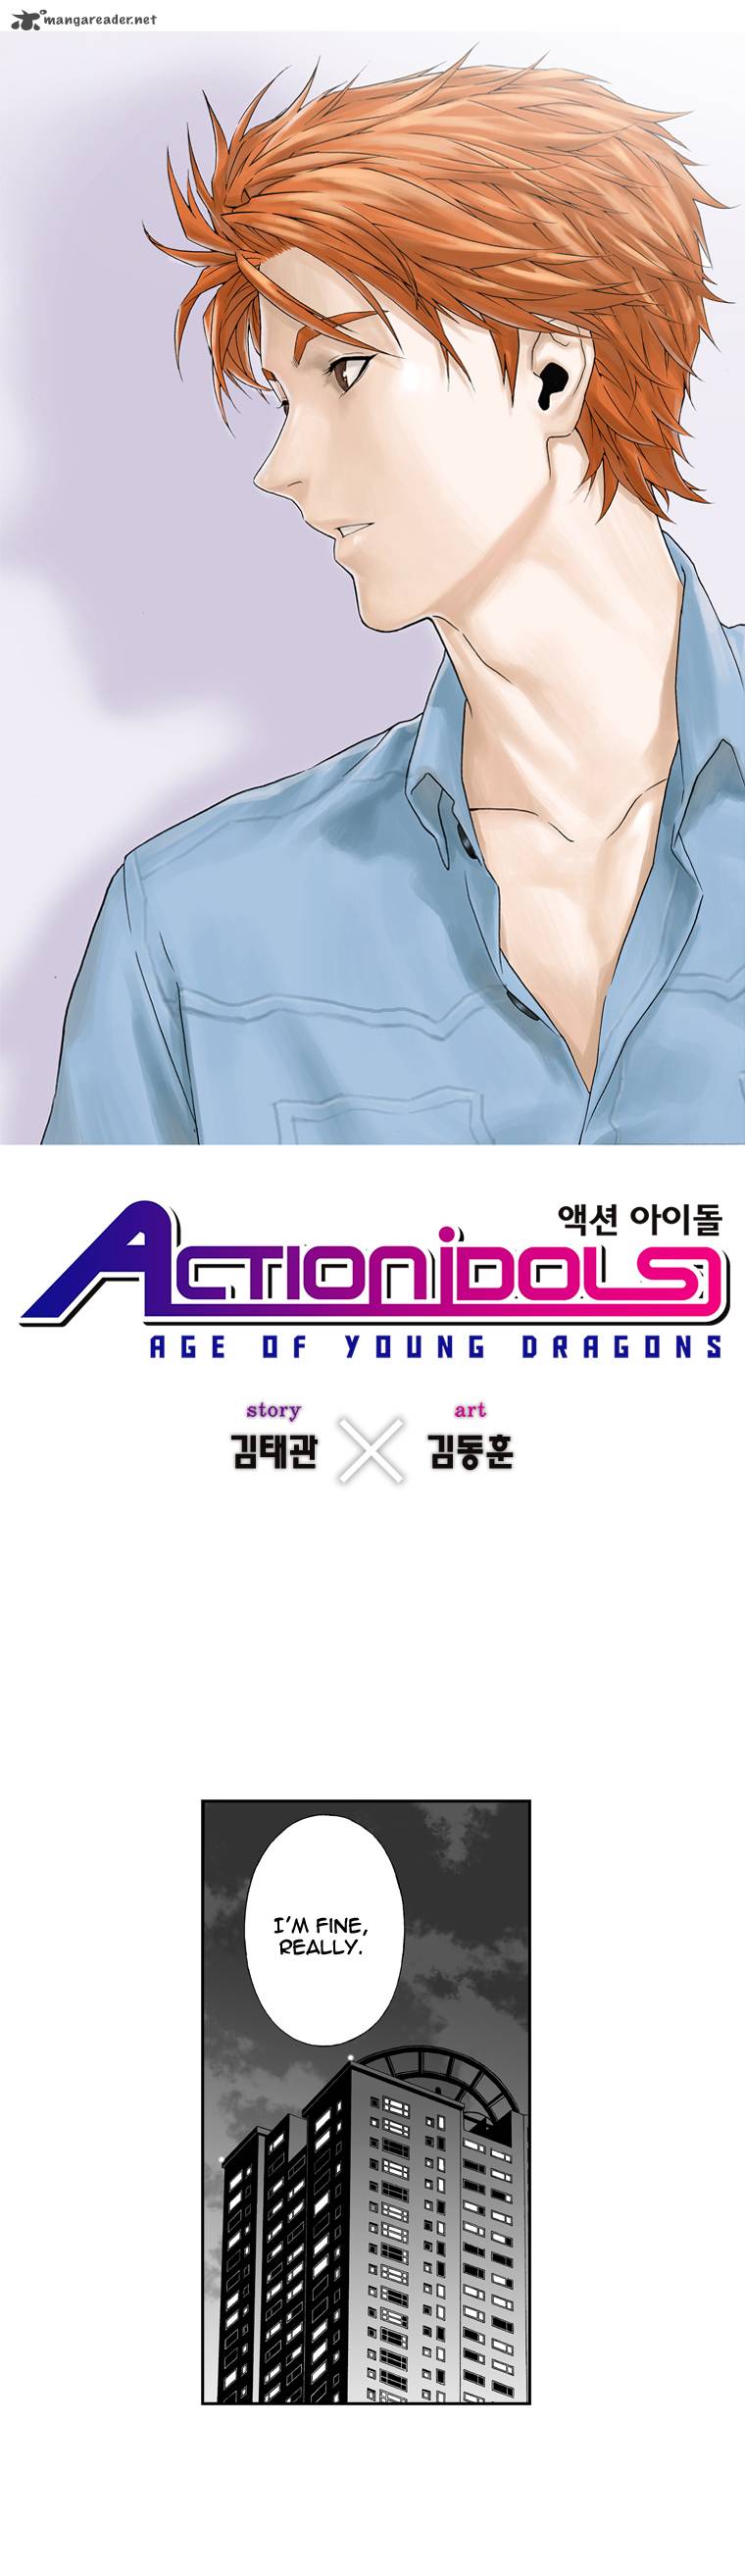 action_idols_age_of_young_dragons_11_2